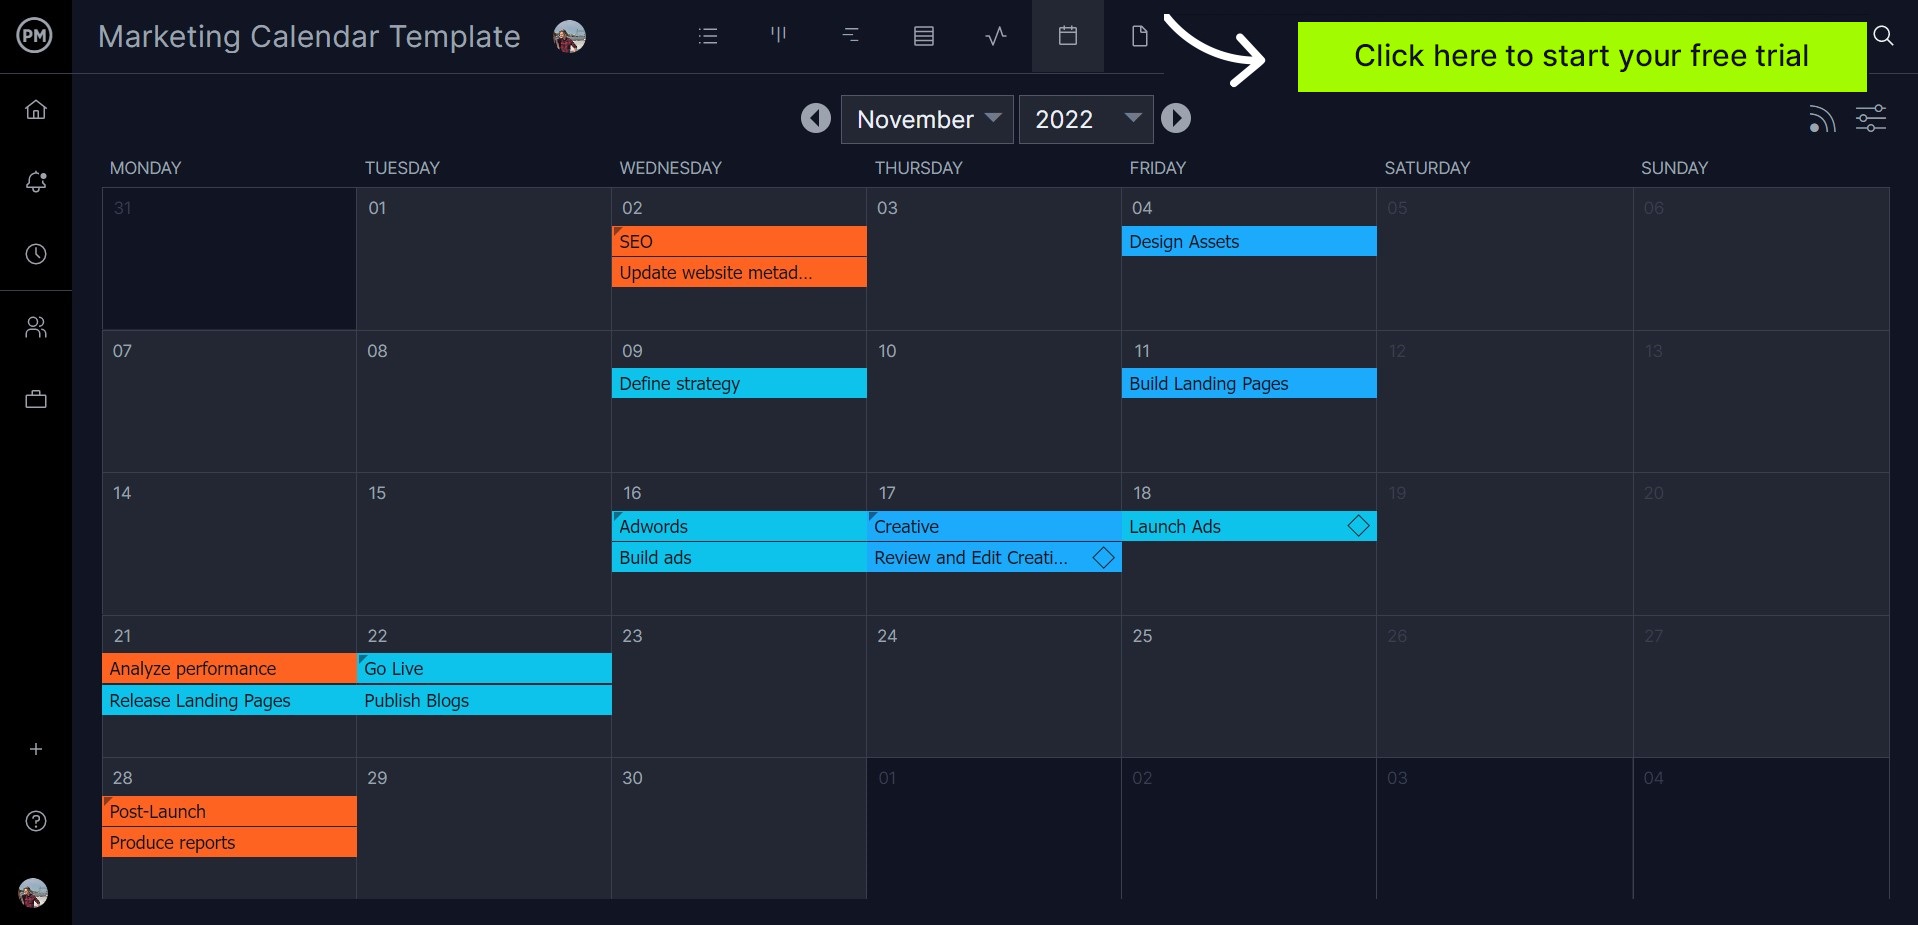 Calendar view in ProjectManager